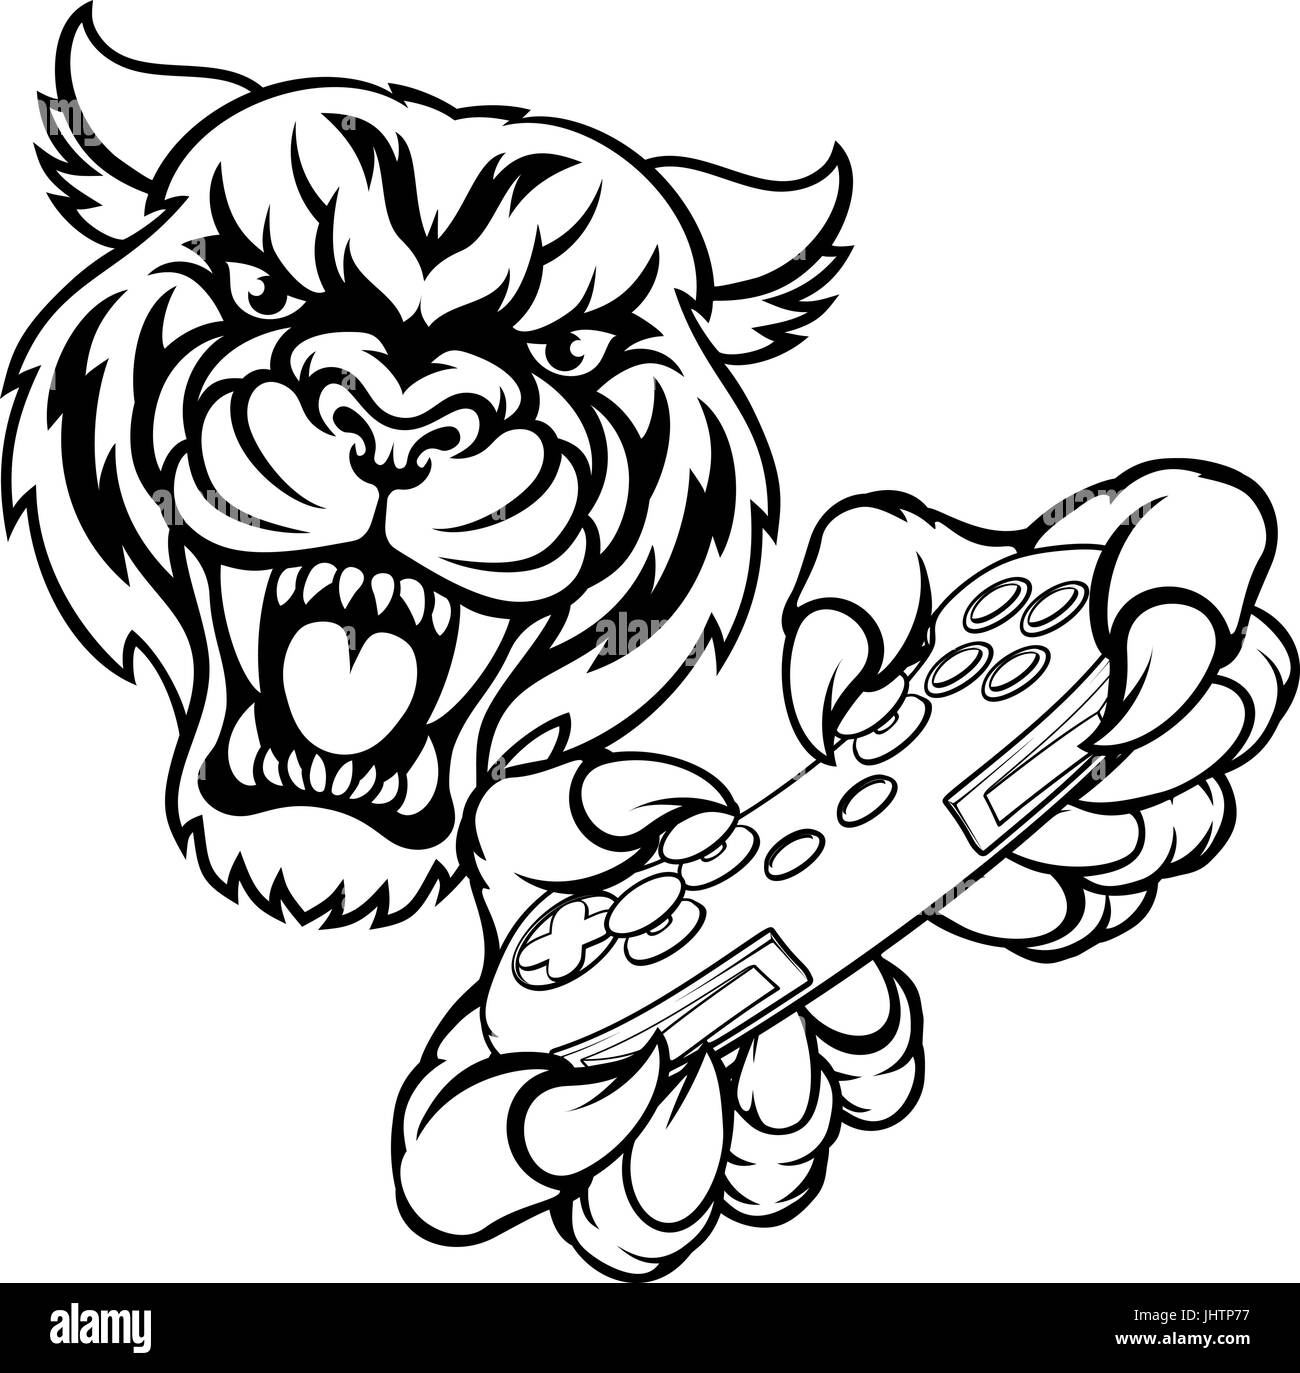 Easy How to Draw a Tiger Tutorial Video and Tiger Coloring Page | Tiger  drawing for kids, Art drawings for kids, Easy drawings for kids